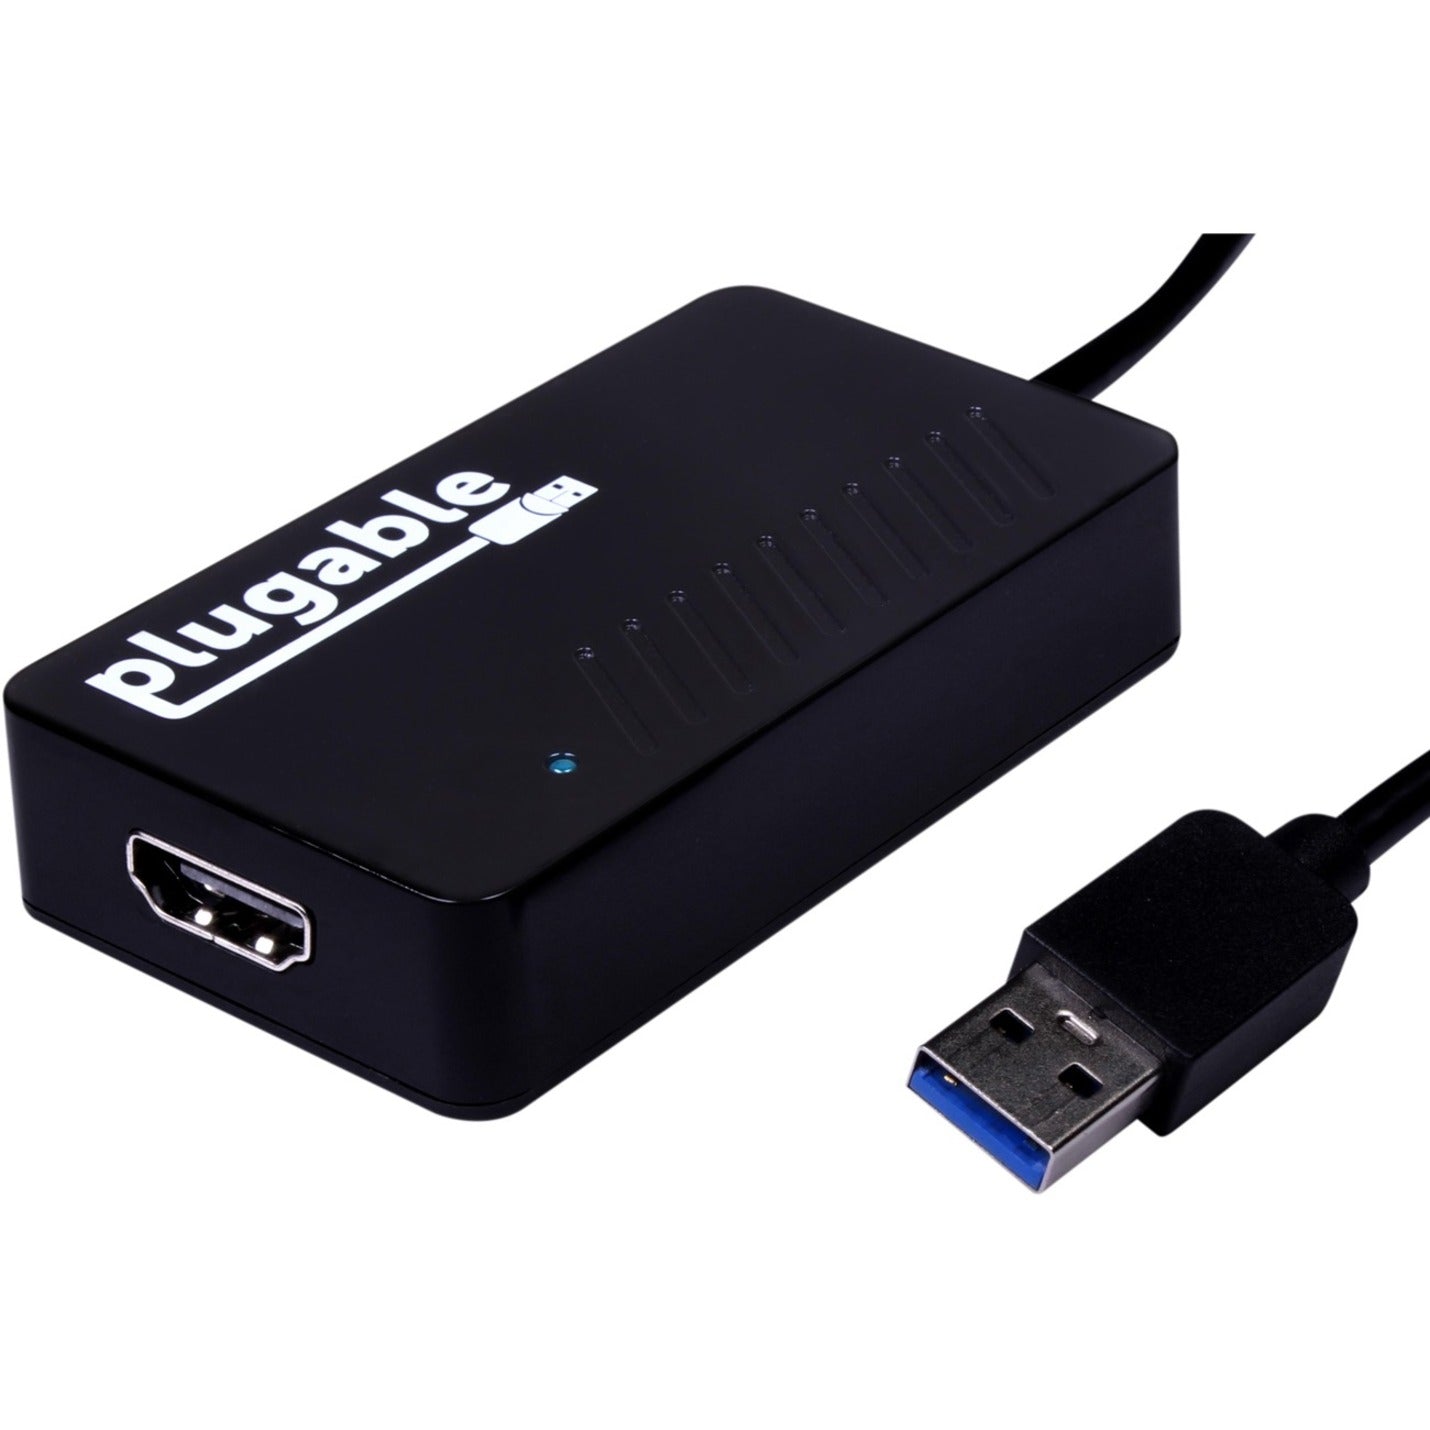 Plugable UGA-2KHDMI USB 3.0 to HDMI Video Graphics Adapter with Audio for Multiple Monitors 2560 x 1440 Resolution